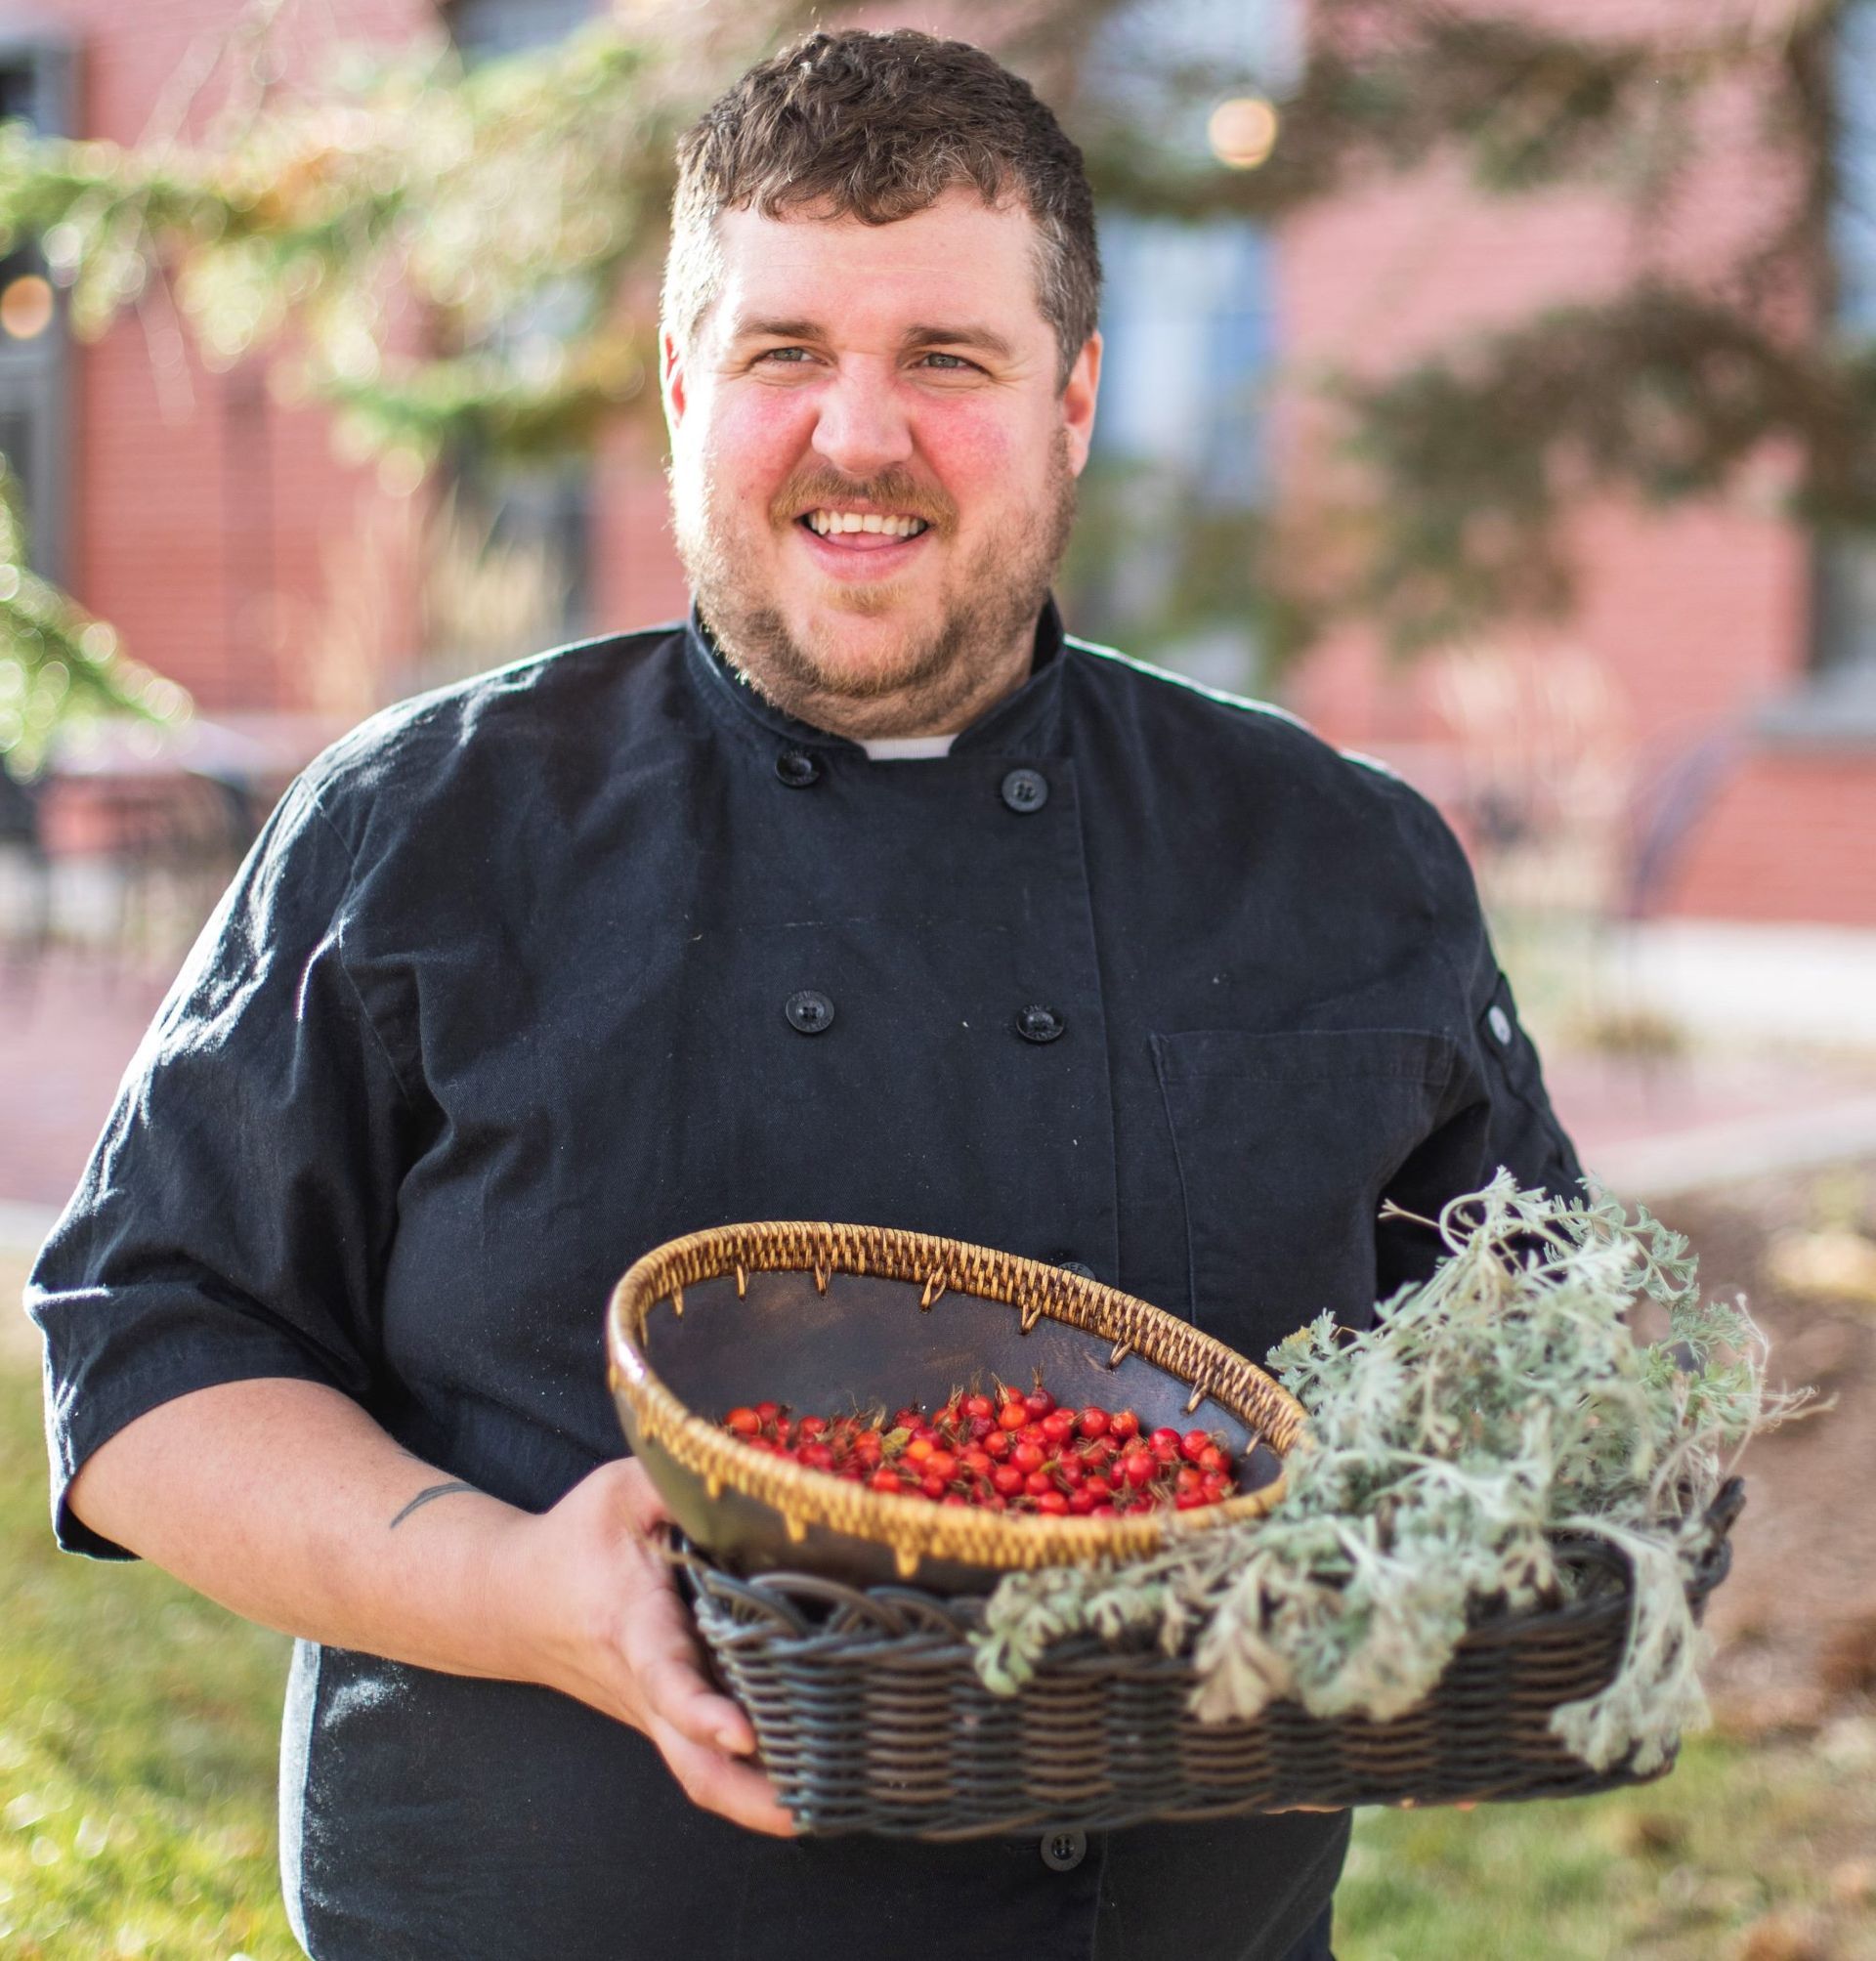 A man in a chef 's uniform is holding a basket of berries.